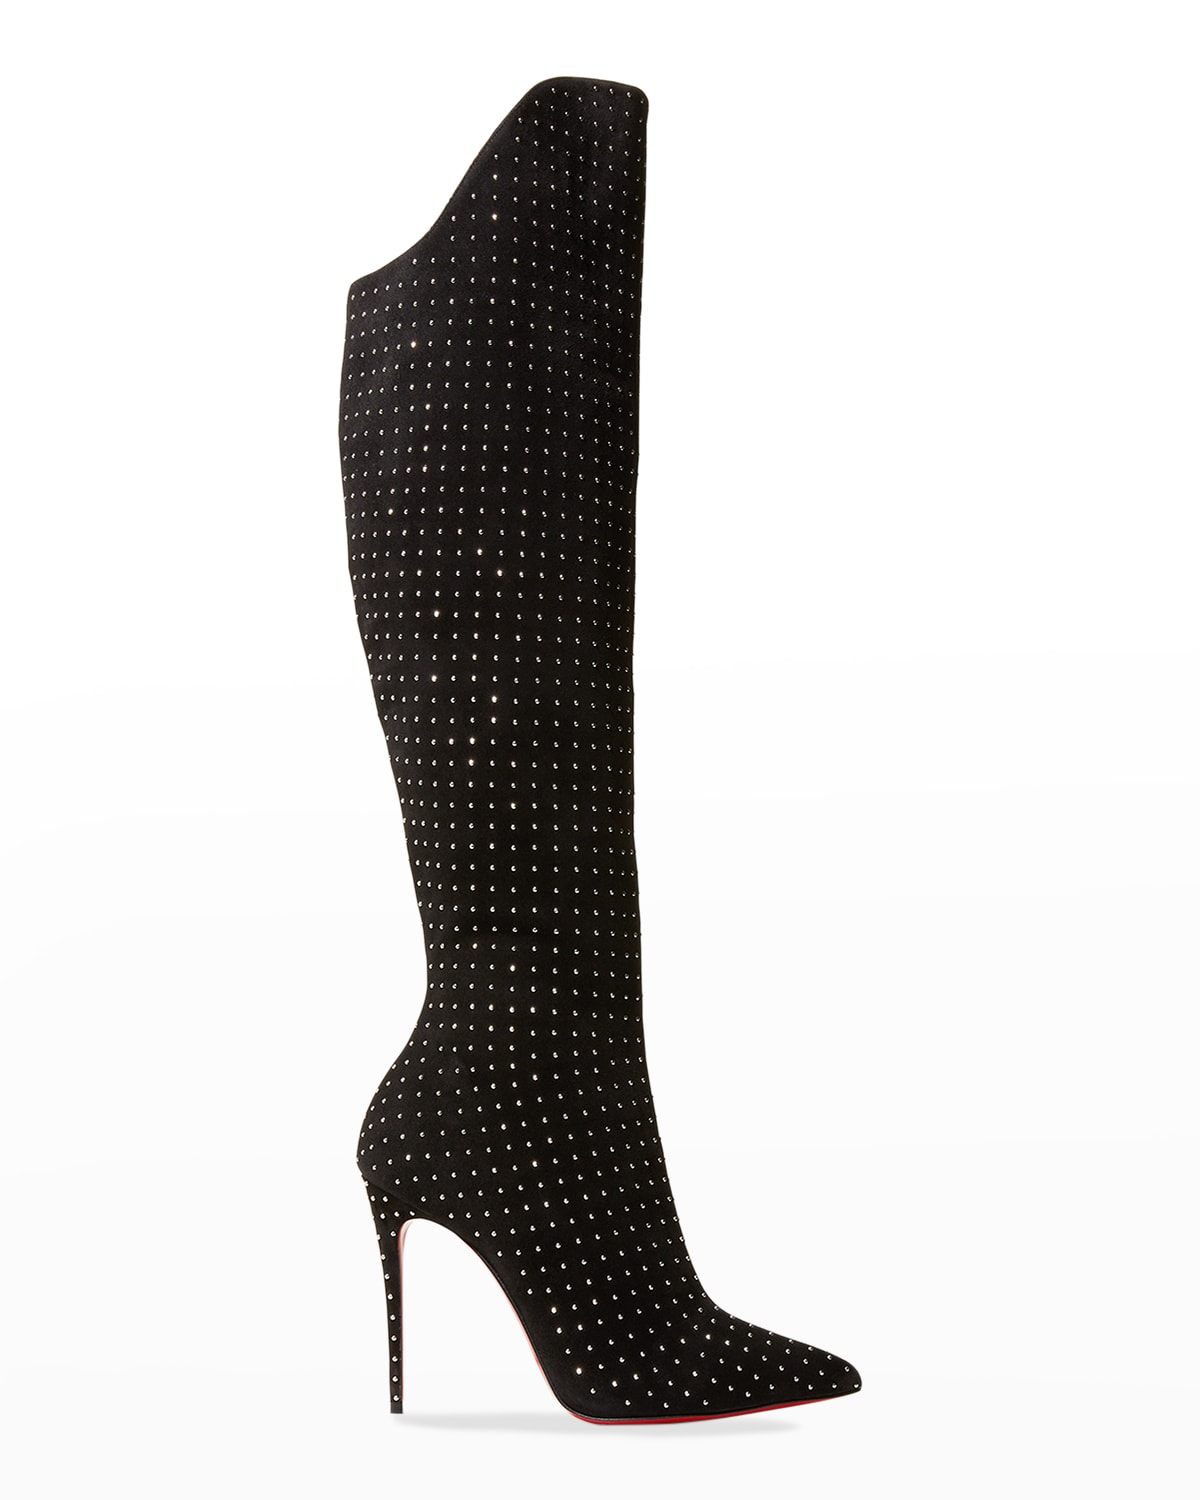 Christian Louboutin Studded Suede Red Sole Knee Boots